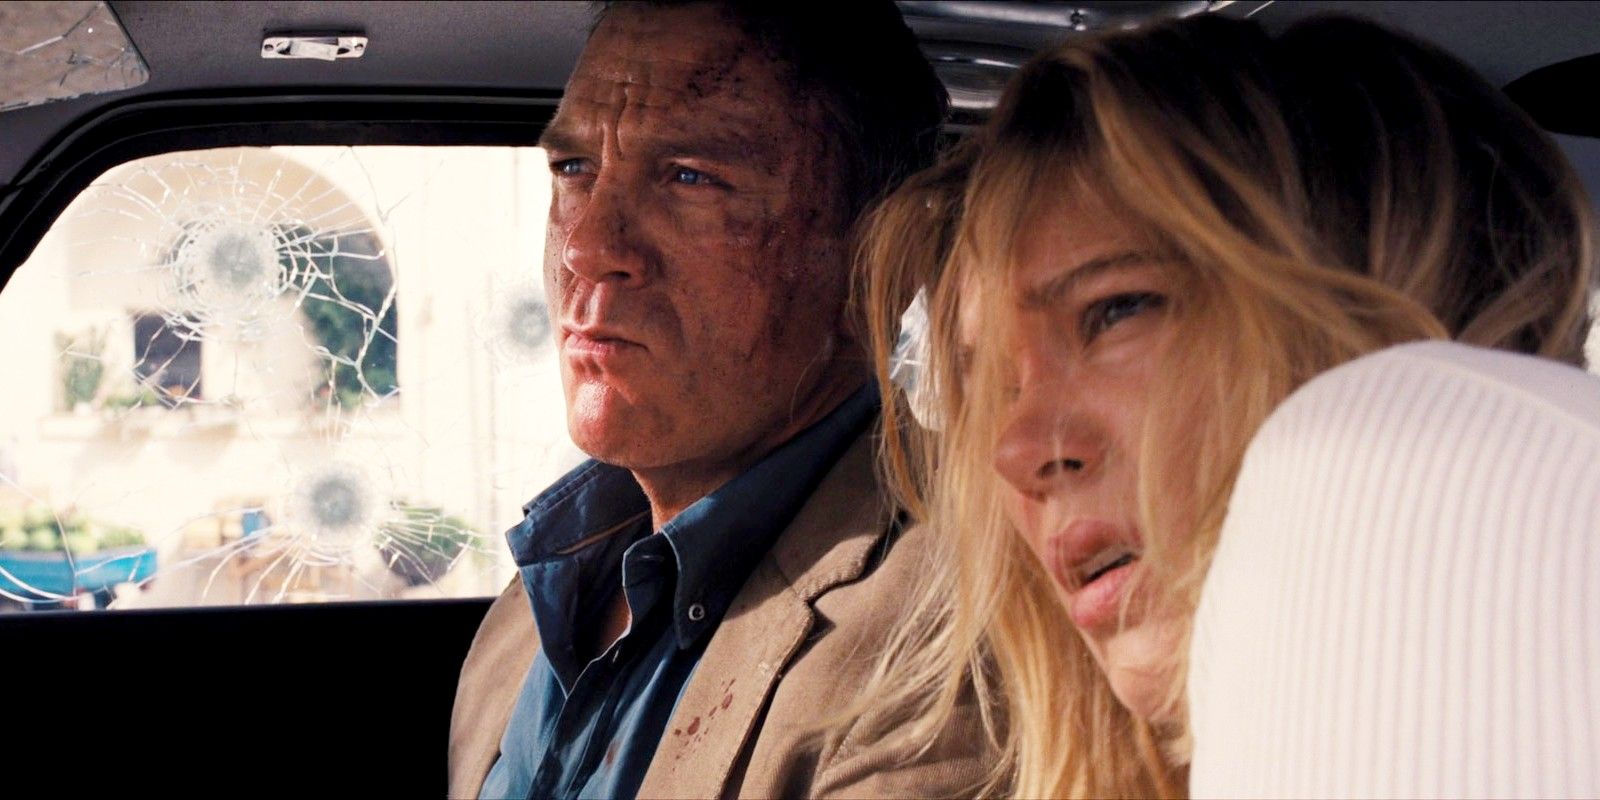 No Time To Die Car Chase Scene with Daniel Craig and Lea Seydoux